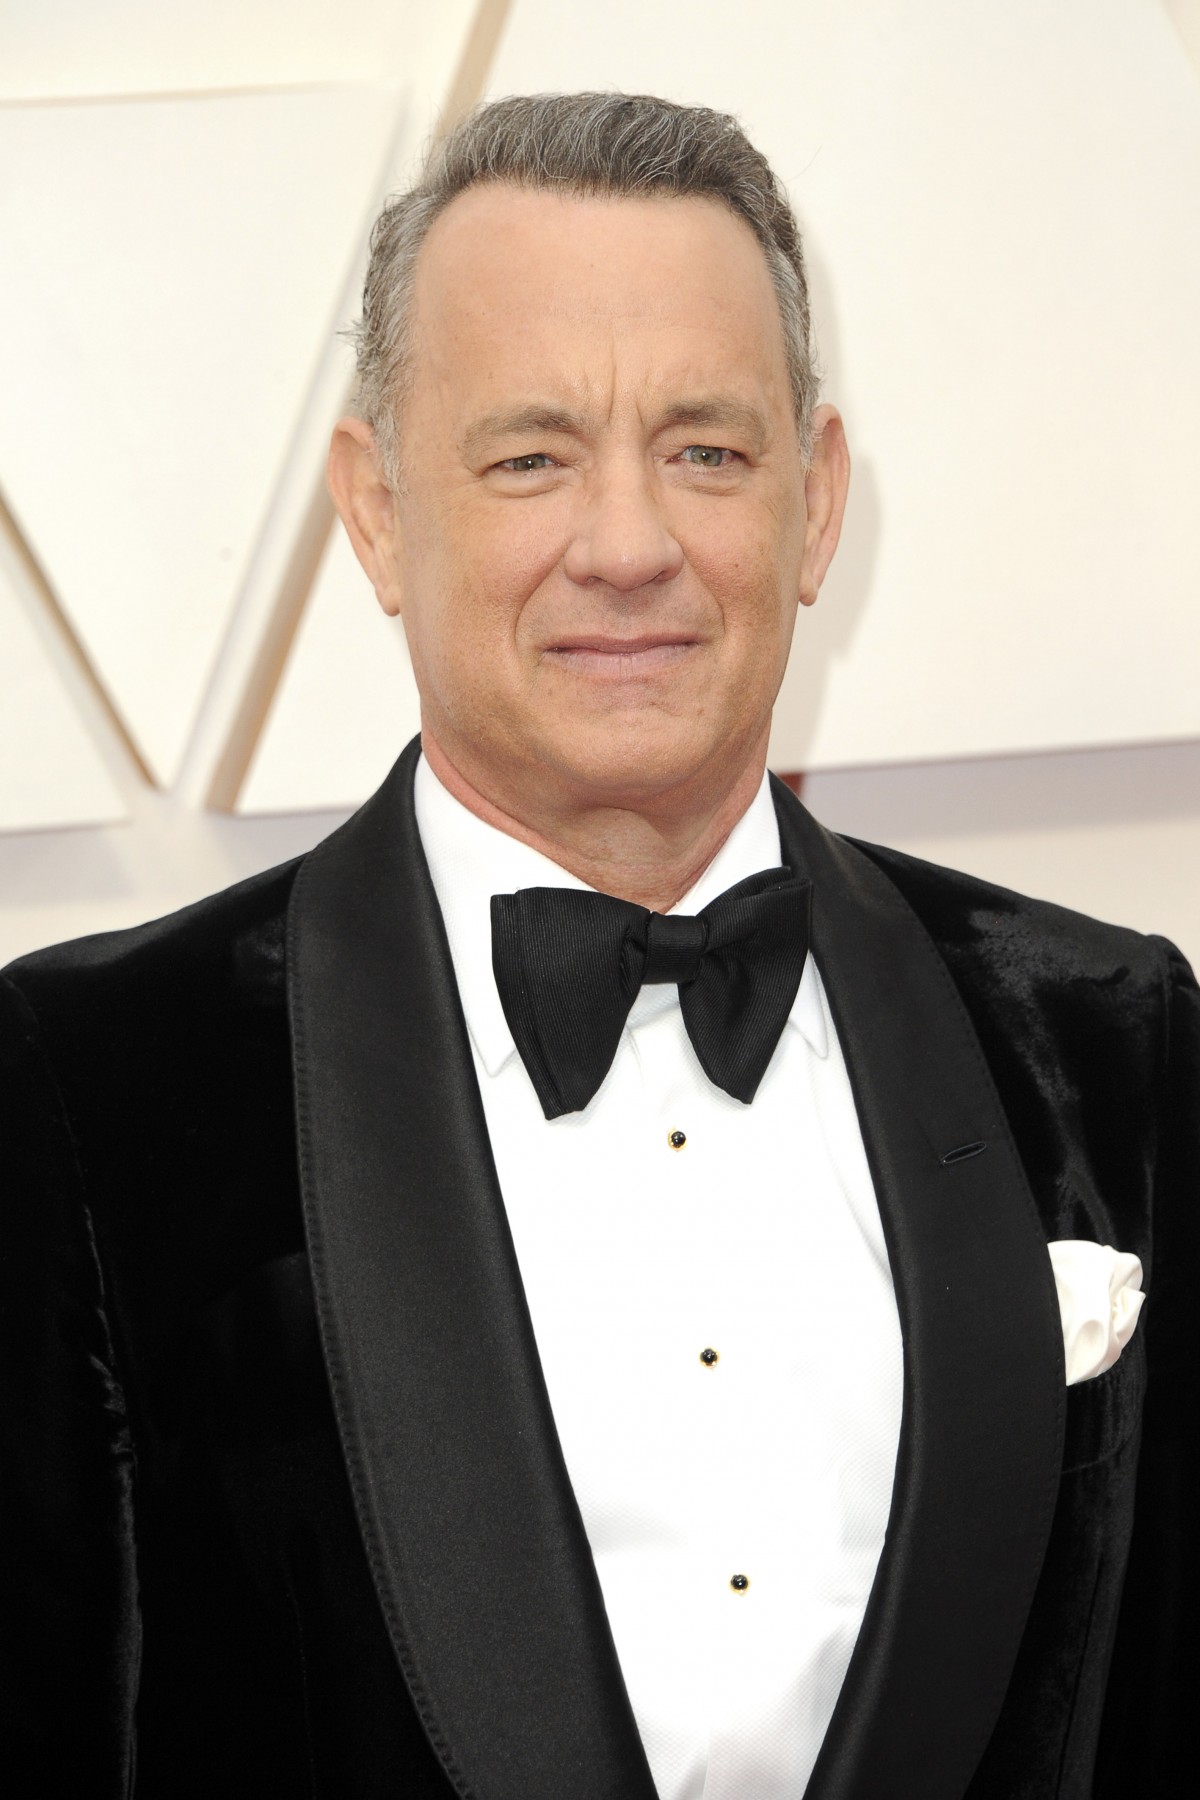 Tom Hanks at the 2020 / 92nd Annual Academy Awards Academy Awards at the Dolby Theater at the Hollyw...